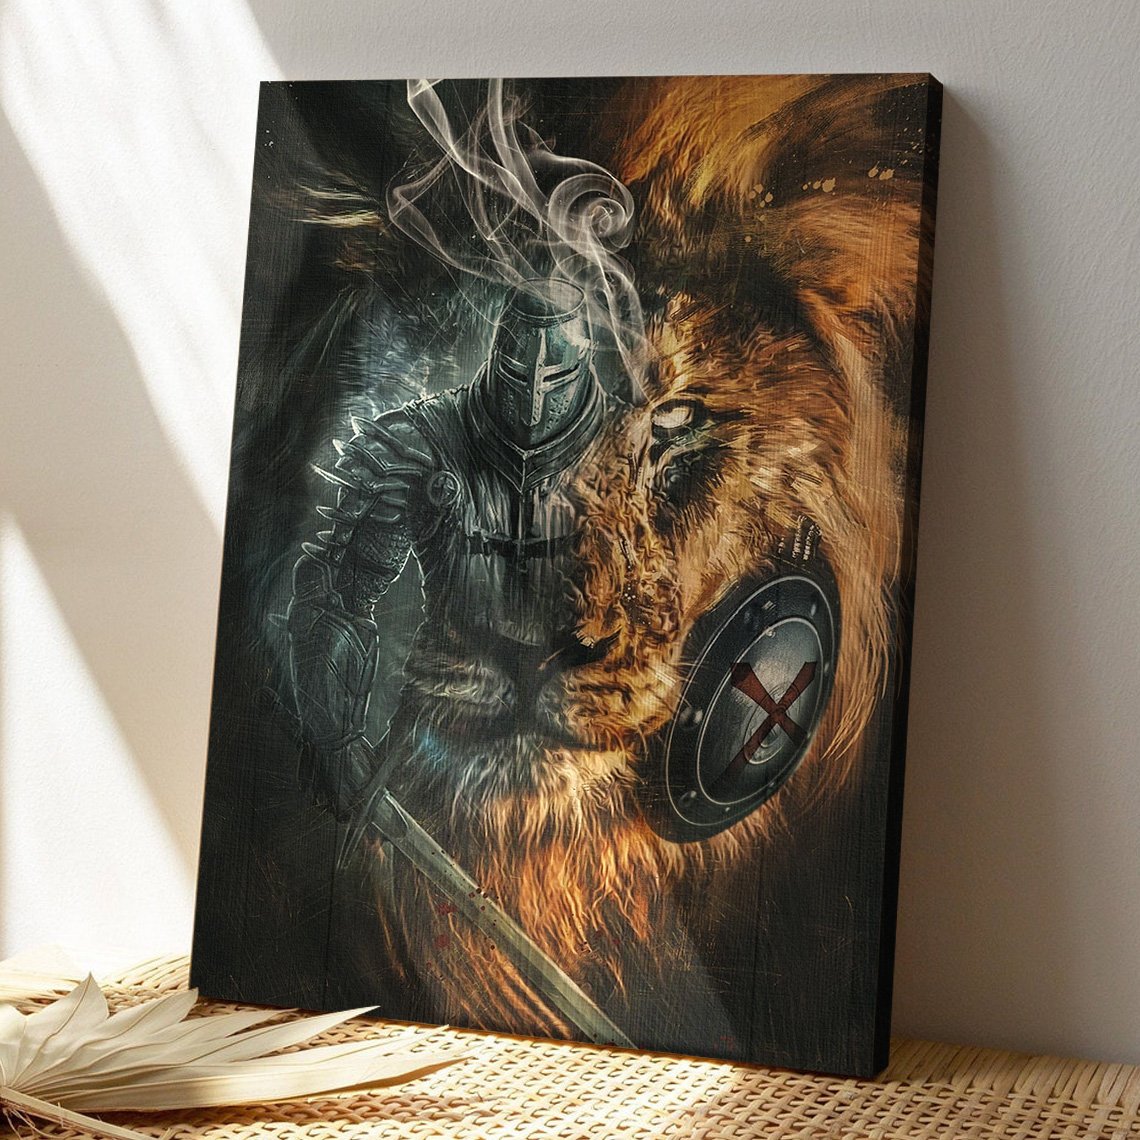 Awesome Warrior And Lion Canvas Posters - Christian Wall Art - Ciaocustom